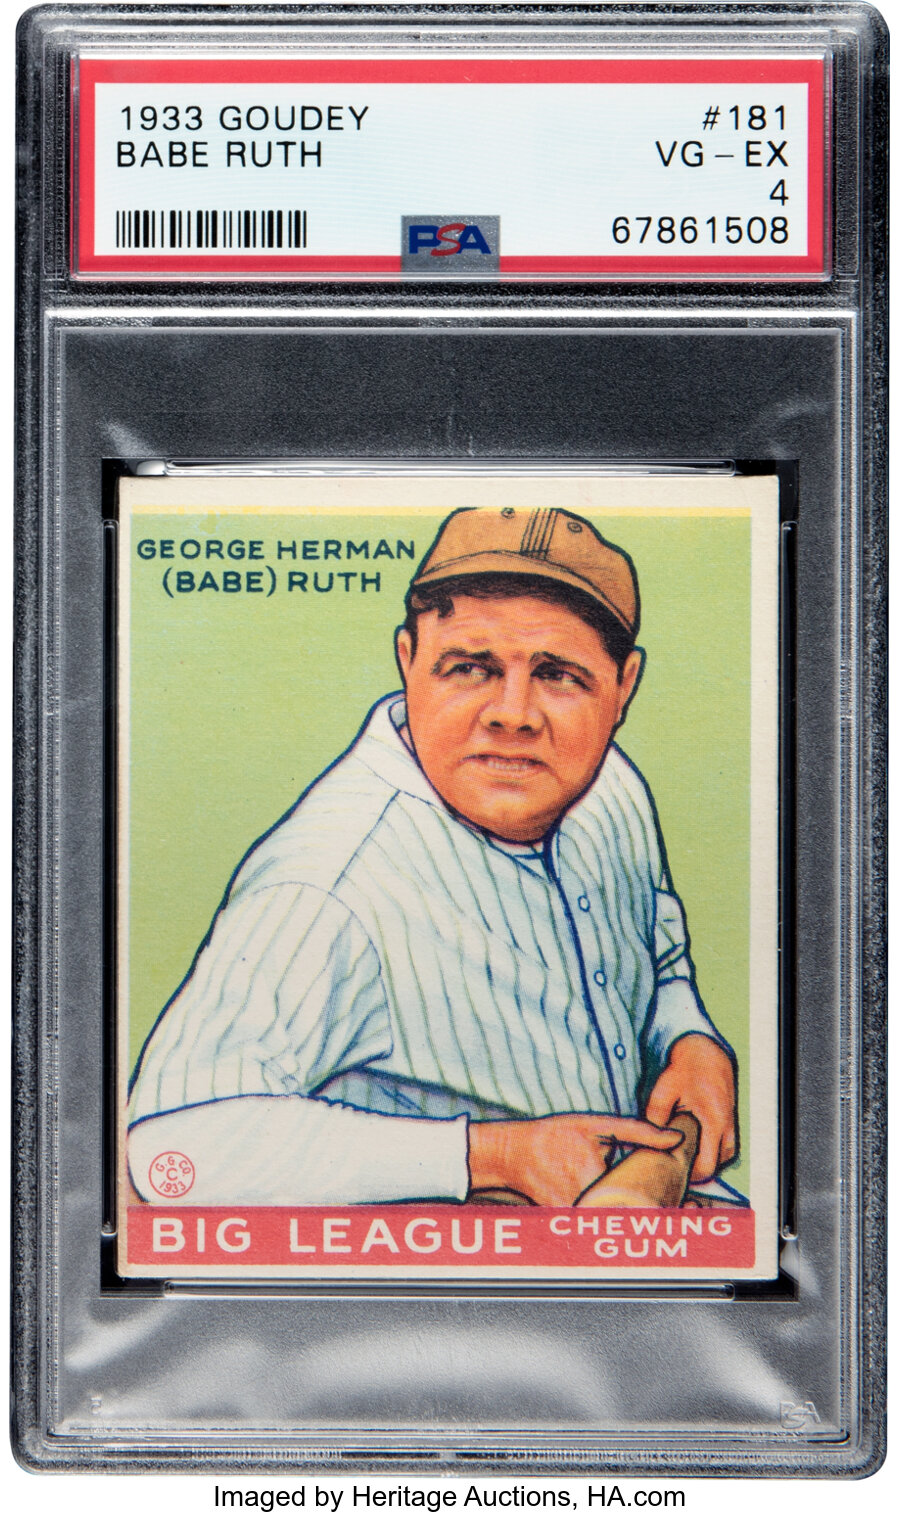 1933 Goudey Babe Ruth #181 PSA VG-EX 4 - New to the Hobby!